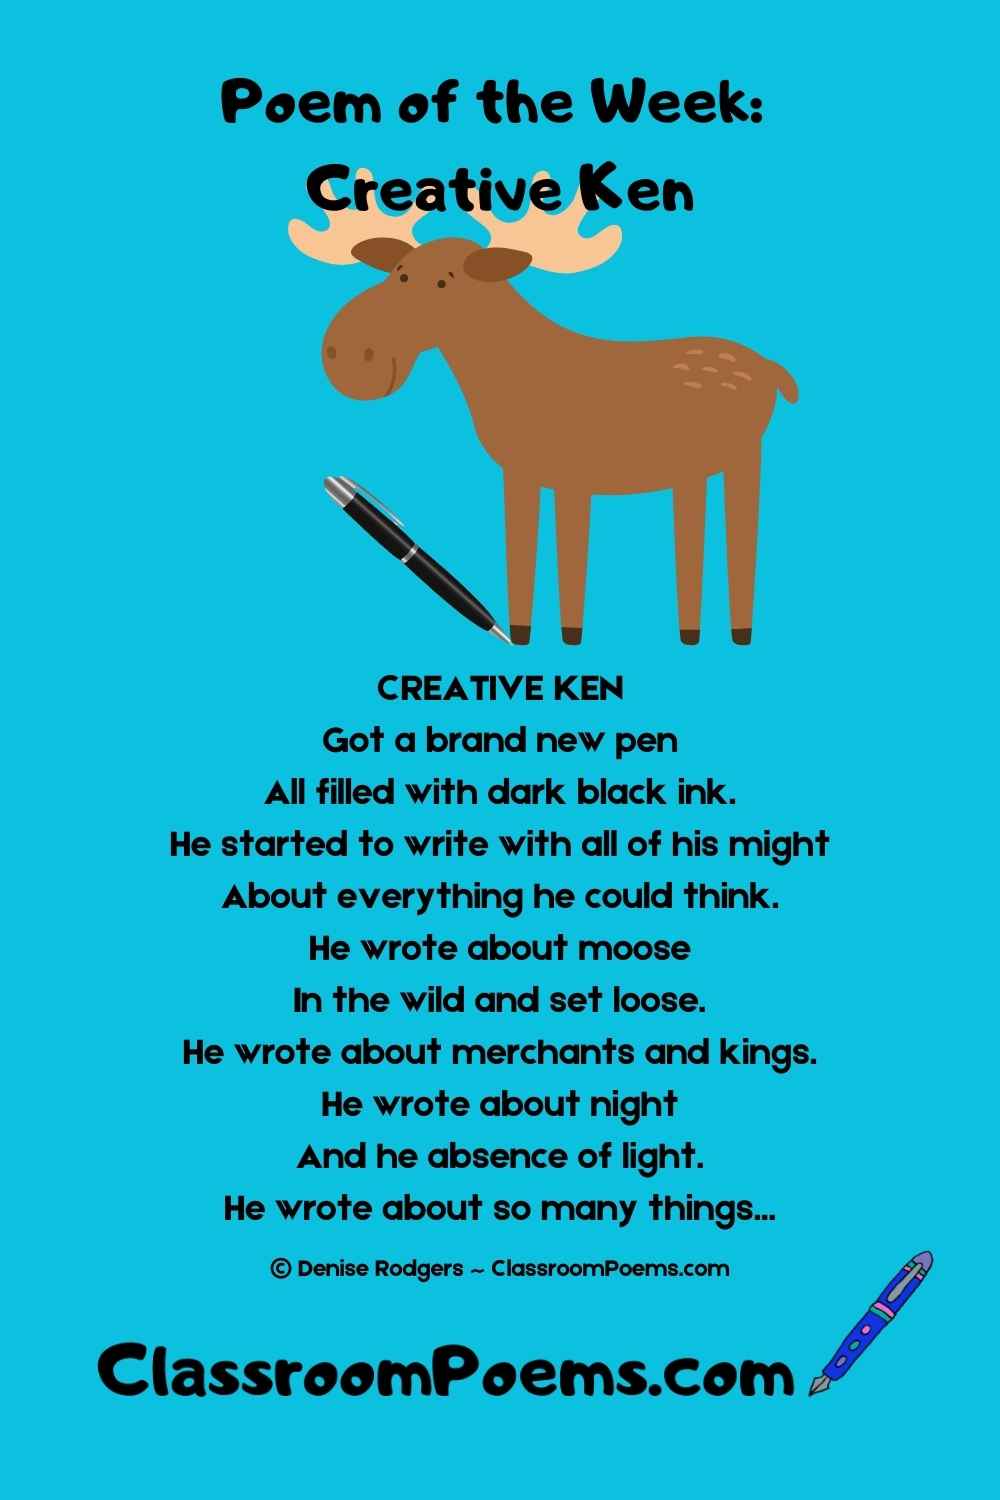 CREATIVE KEN, a Poem of the Week by Denise Rodgers on ClassroomPoems.com.